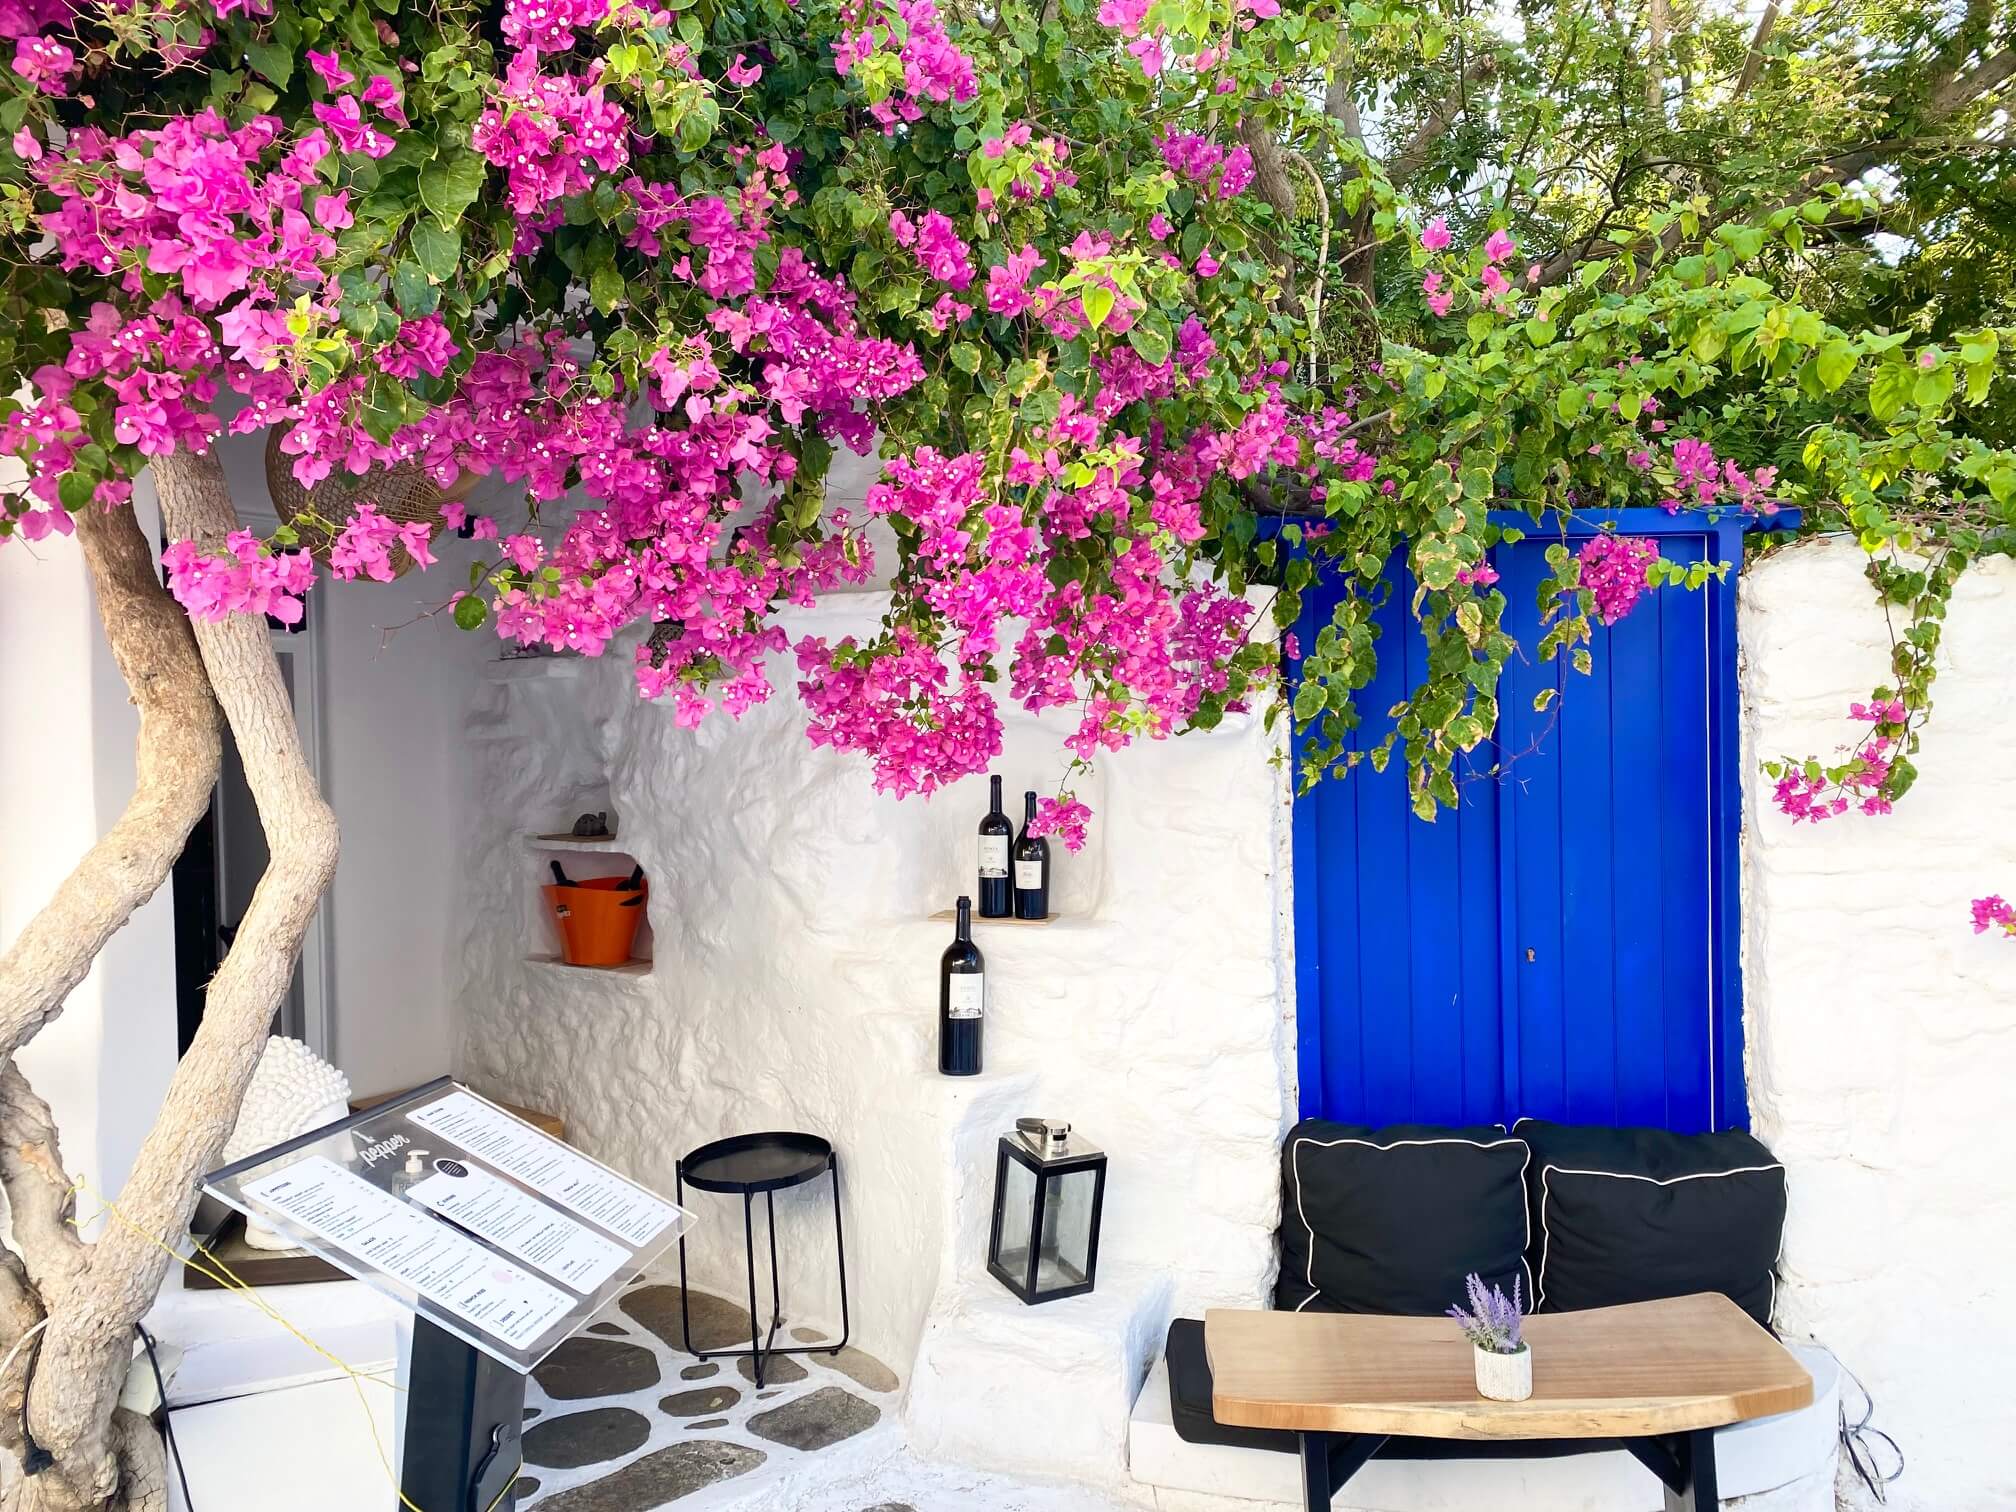 Restaurant entrance under a pink Bougainvillea in a whitewashed alley